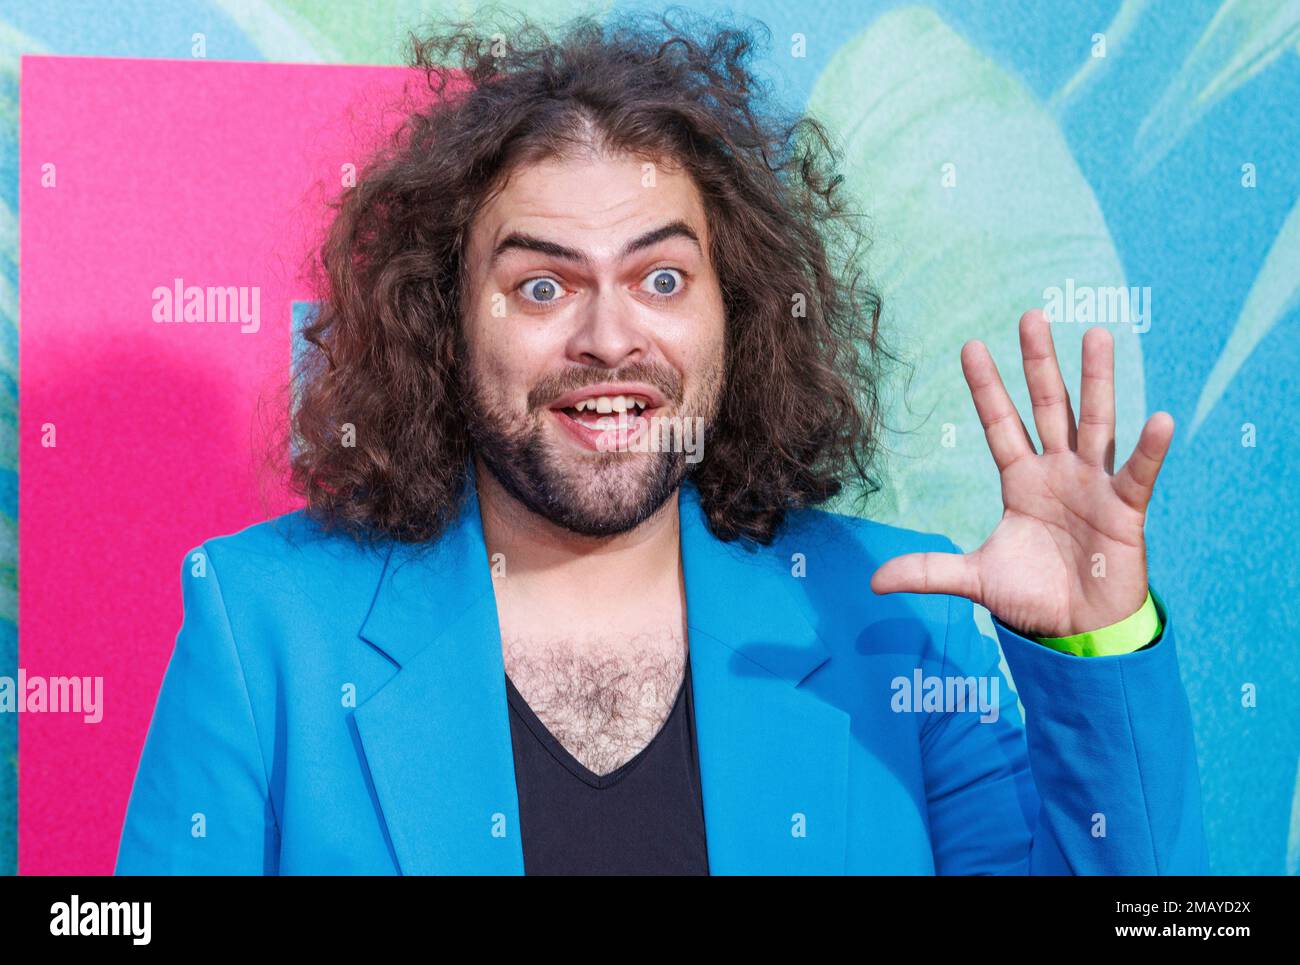 dustin-ybarra-arrives-at-the-world-premiere-of-easter-sunday-on-tuesday-aug-2-2022-at-the-tcl-chinese-theatre-in-los-angeles-photo-by-willy-sanjuaninvisionap-2MAYD2X